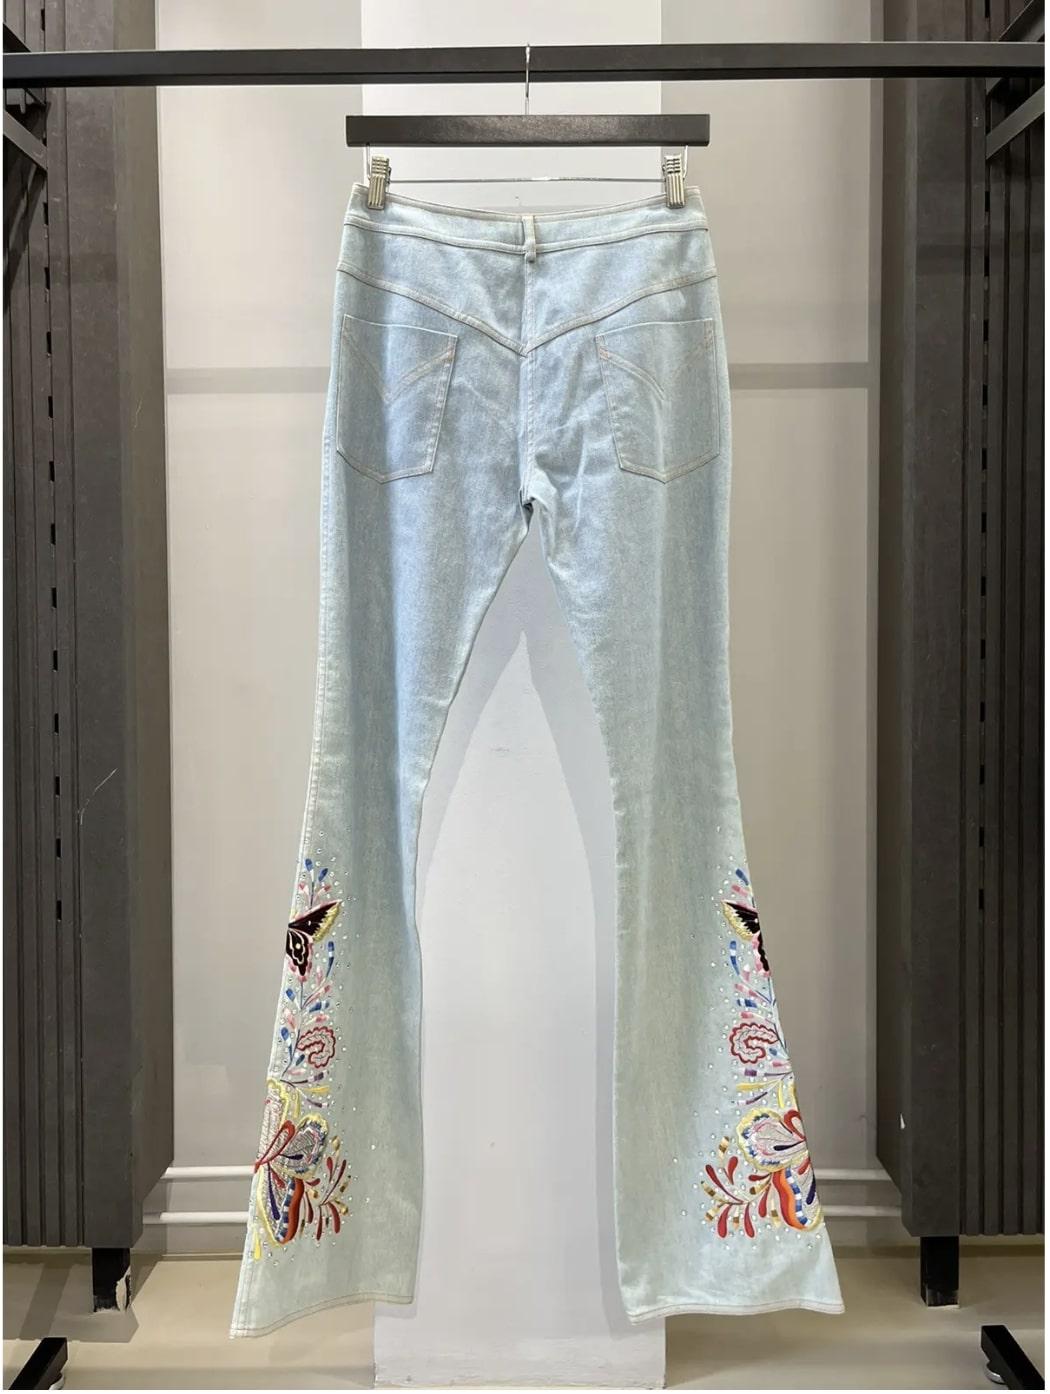 Christian Dior
S/S 2002 Galliano Swarovski Butterfly Denim
Size FR 40

Beautiful Christian Dior Swarovski butterfly denim in a size FR 40. From the 2002 collection. In great condition without any flaws. 